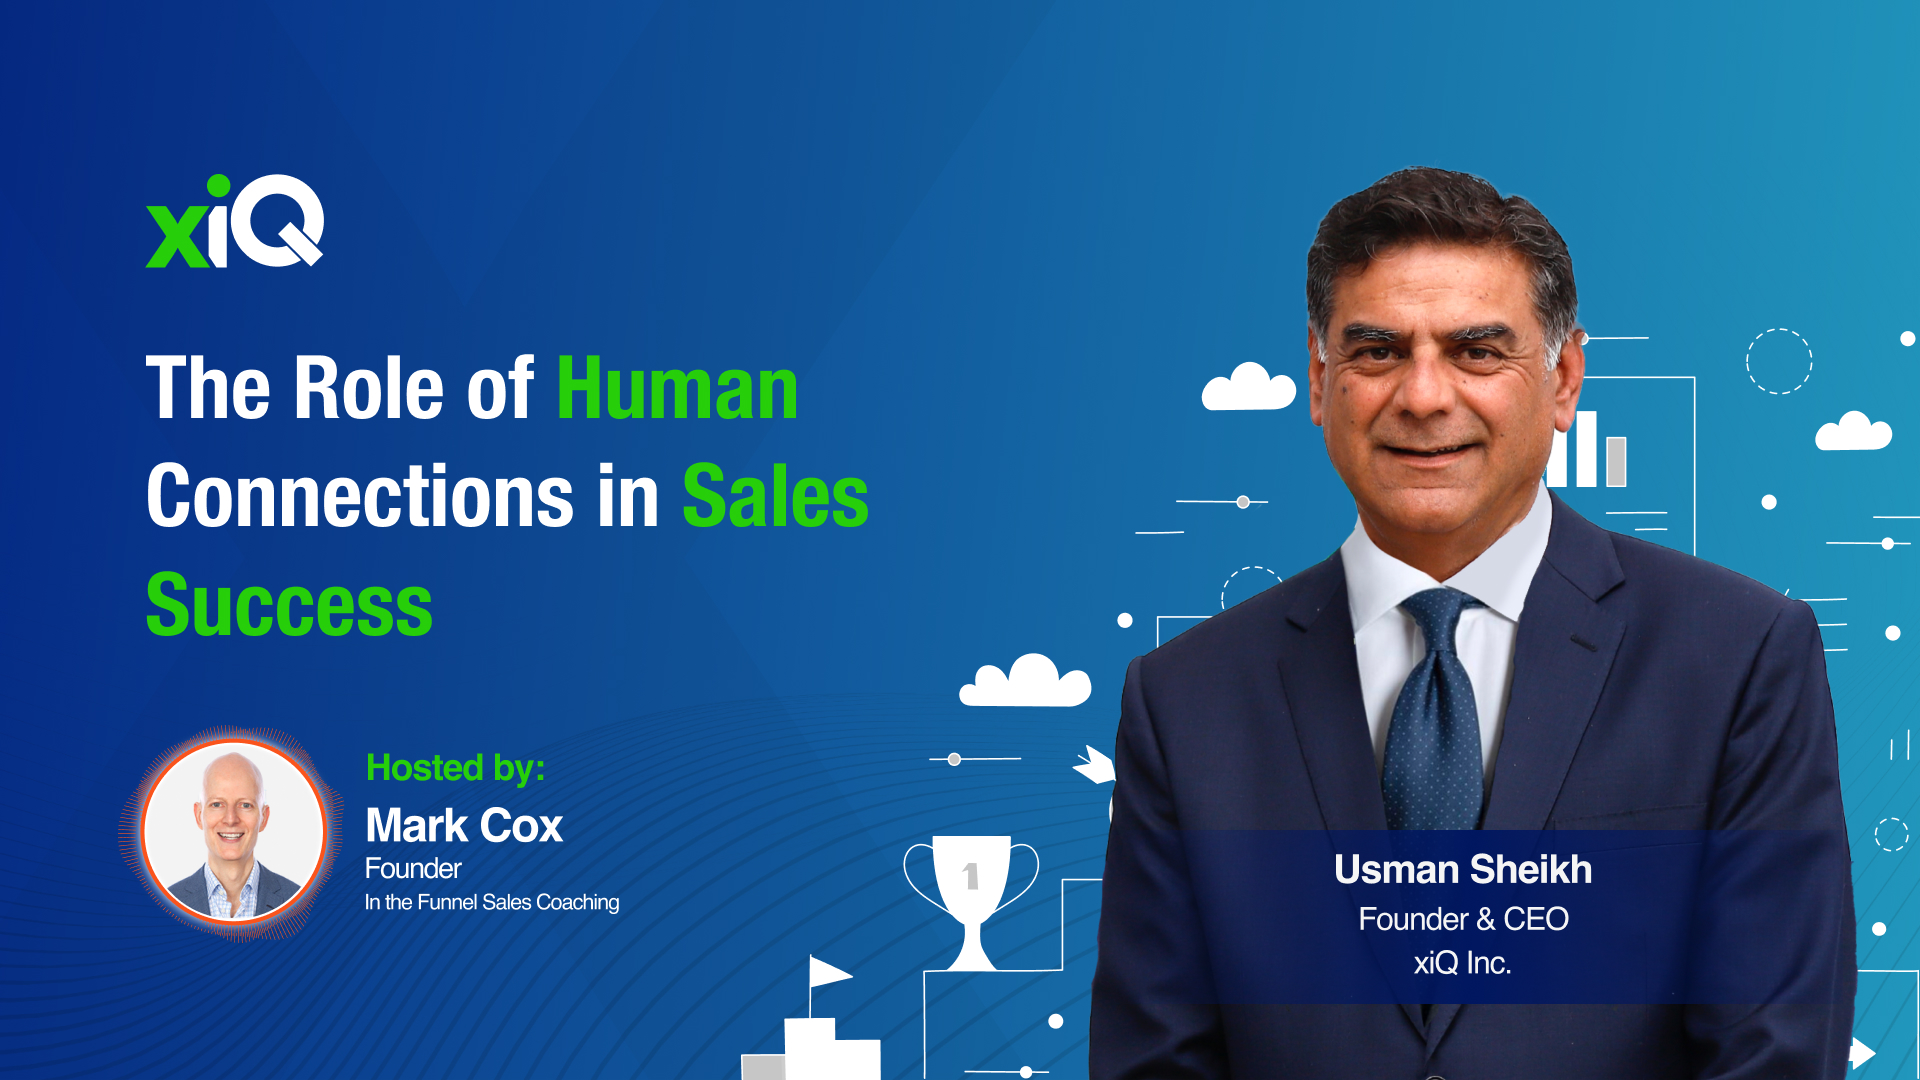 The Role of Human Connections in Sales Success